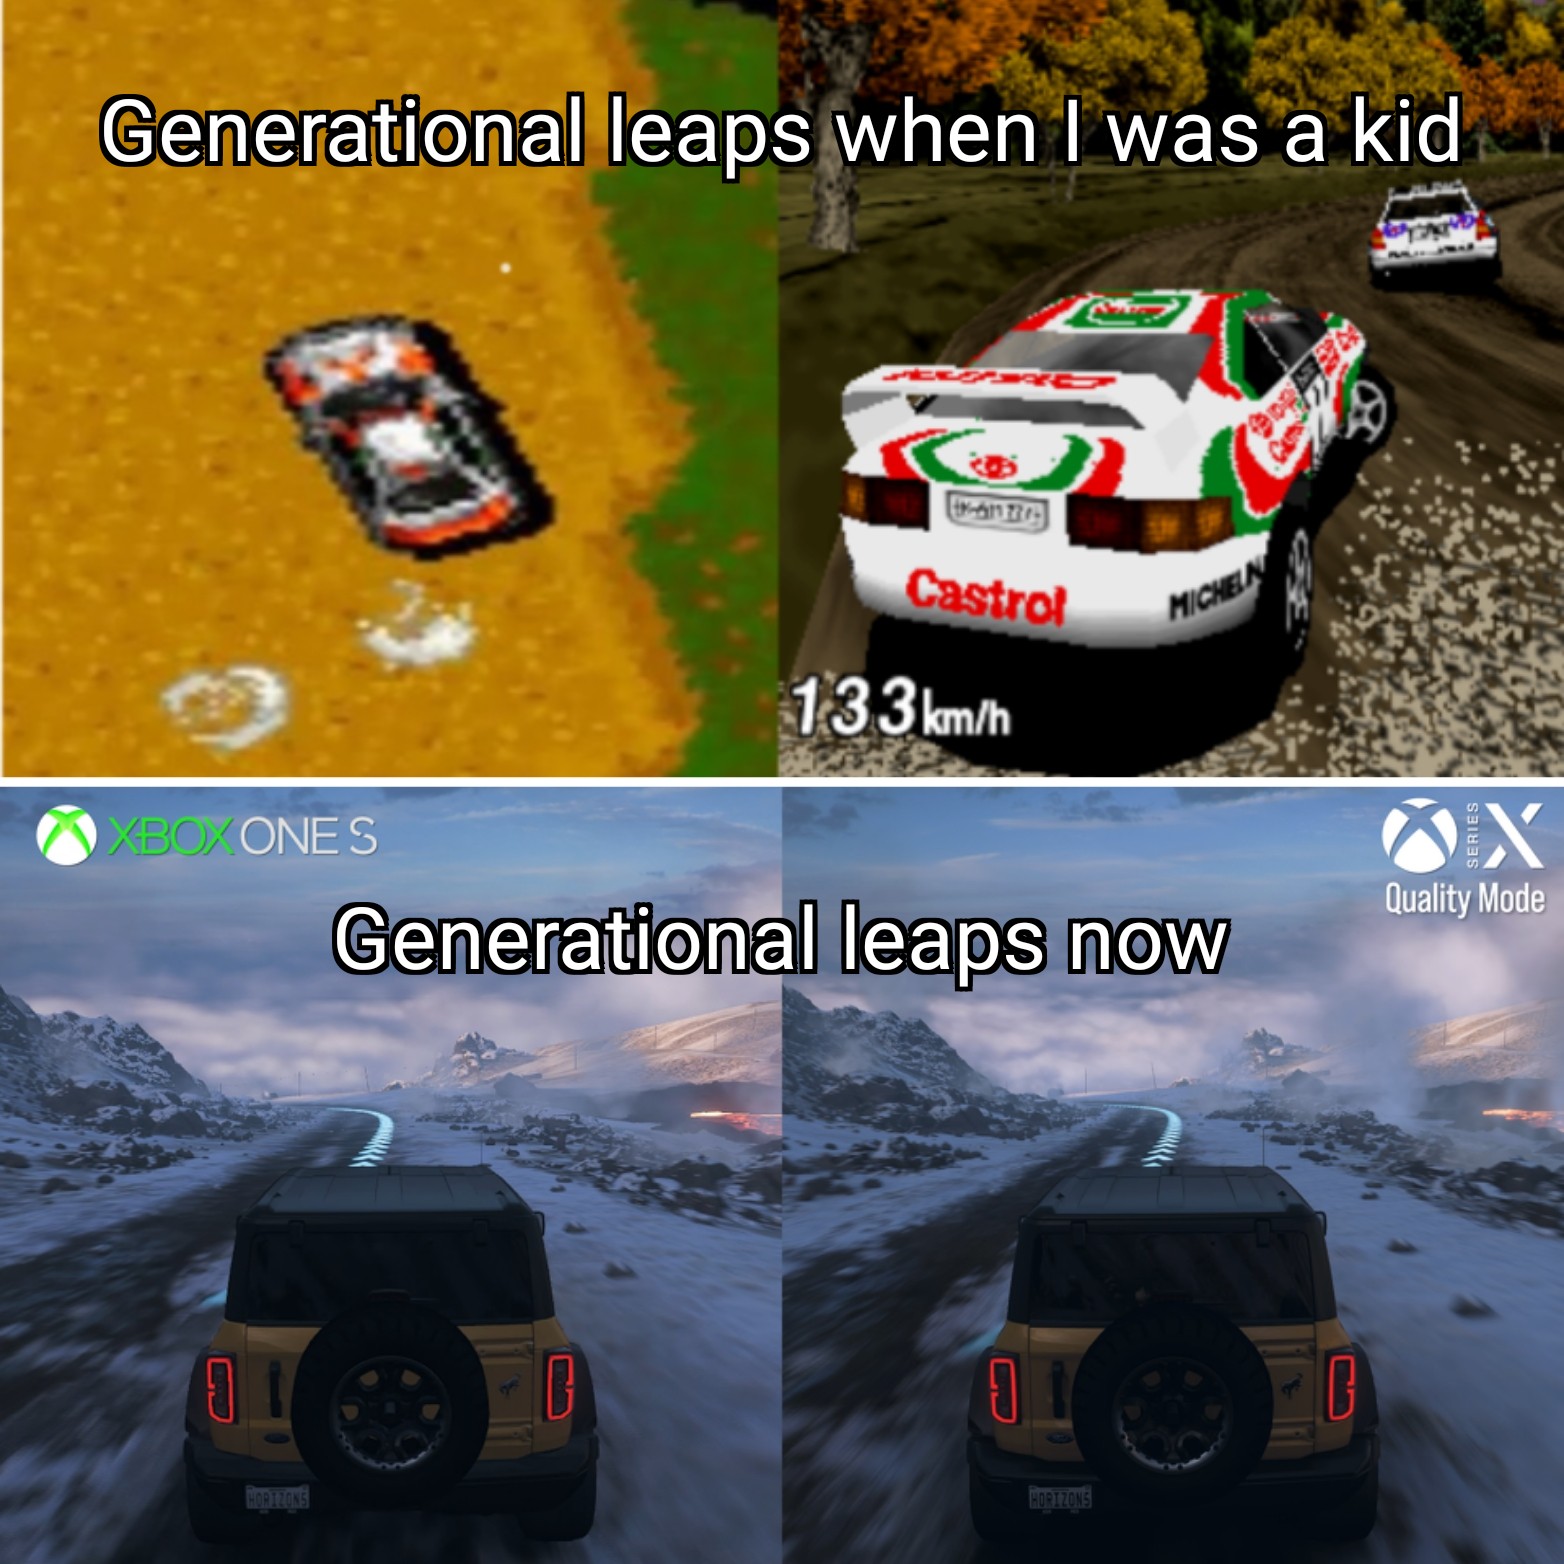 gaming memes  - sega rally - Generational leaps when I was a kid 17 Castrol Michen 133 kmh Xbox Ones Ox Quality Mode Generational leaps now a i Horitions Horizon